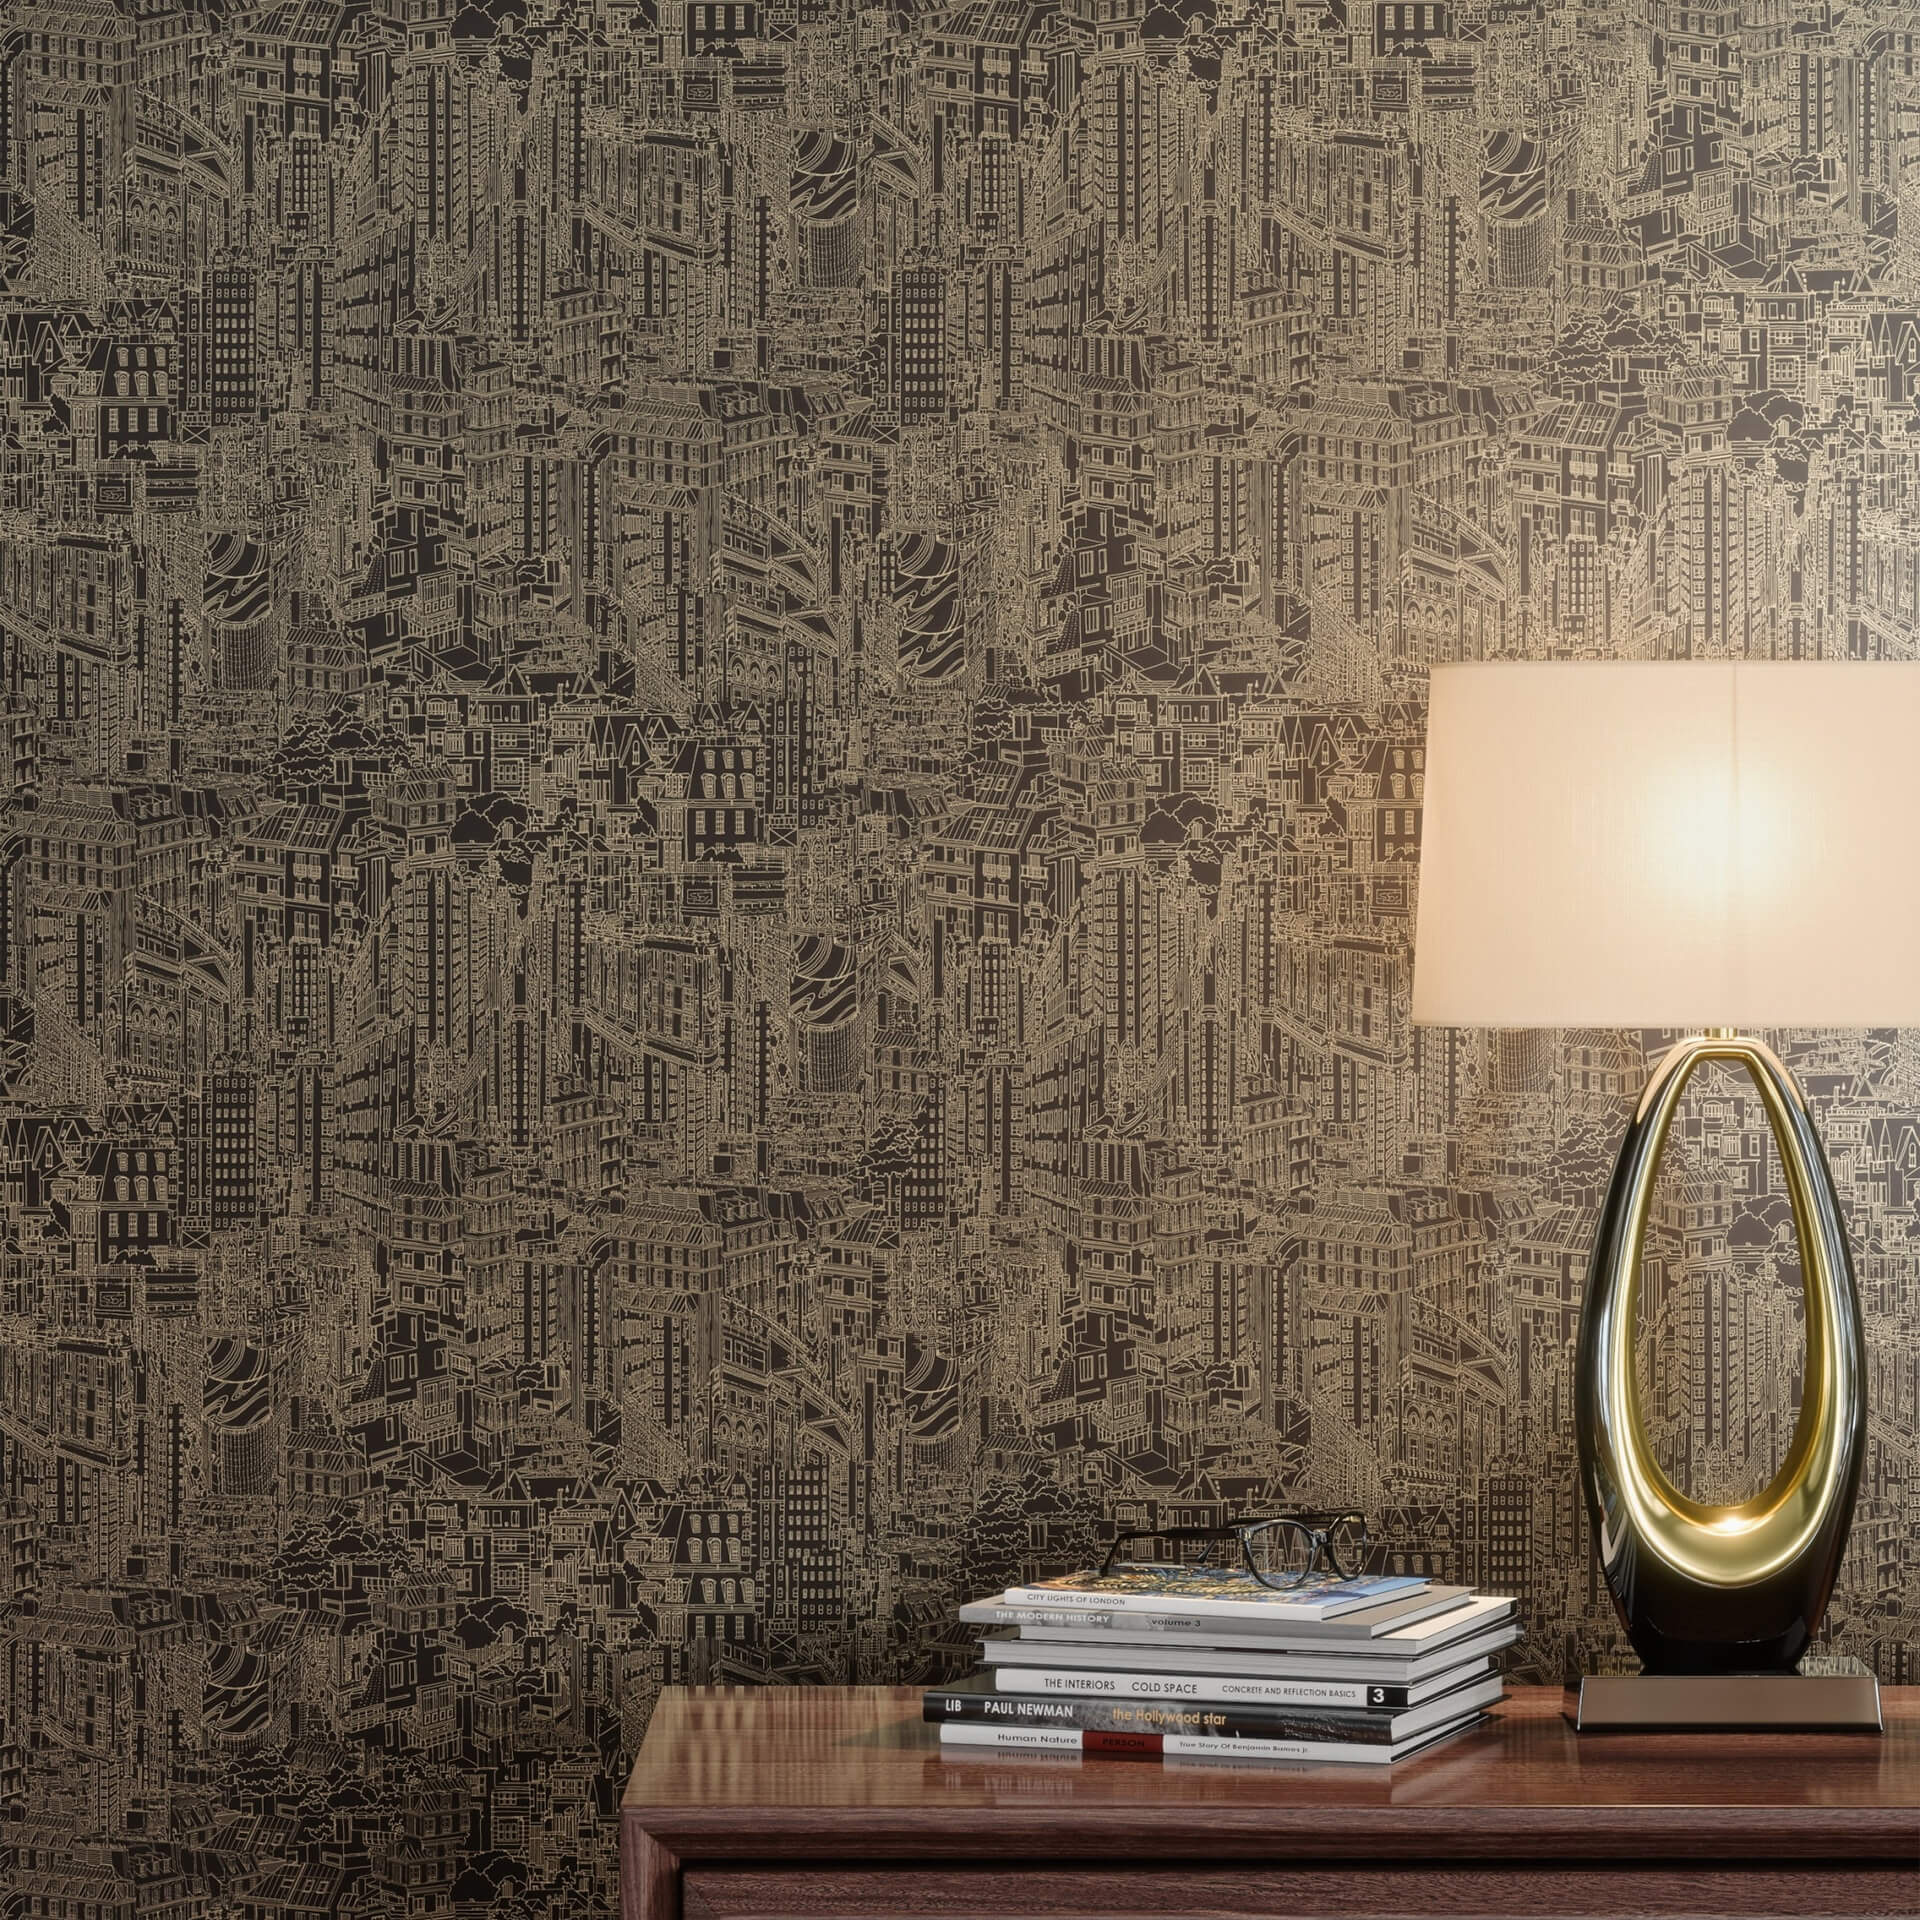 3D Visualization for Black and Gold Wallpaper